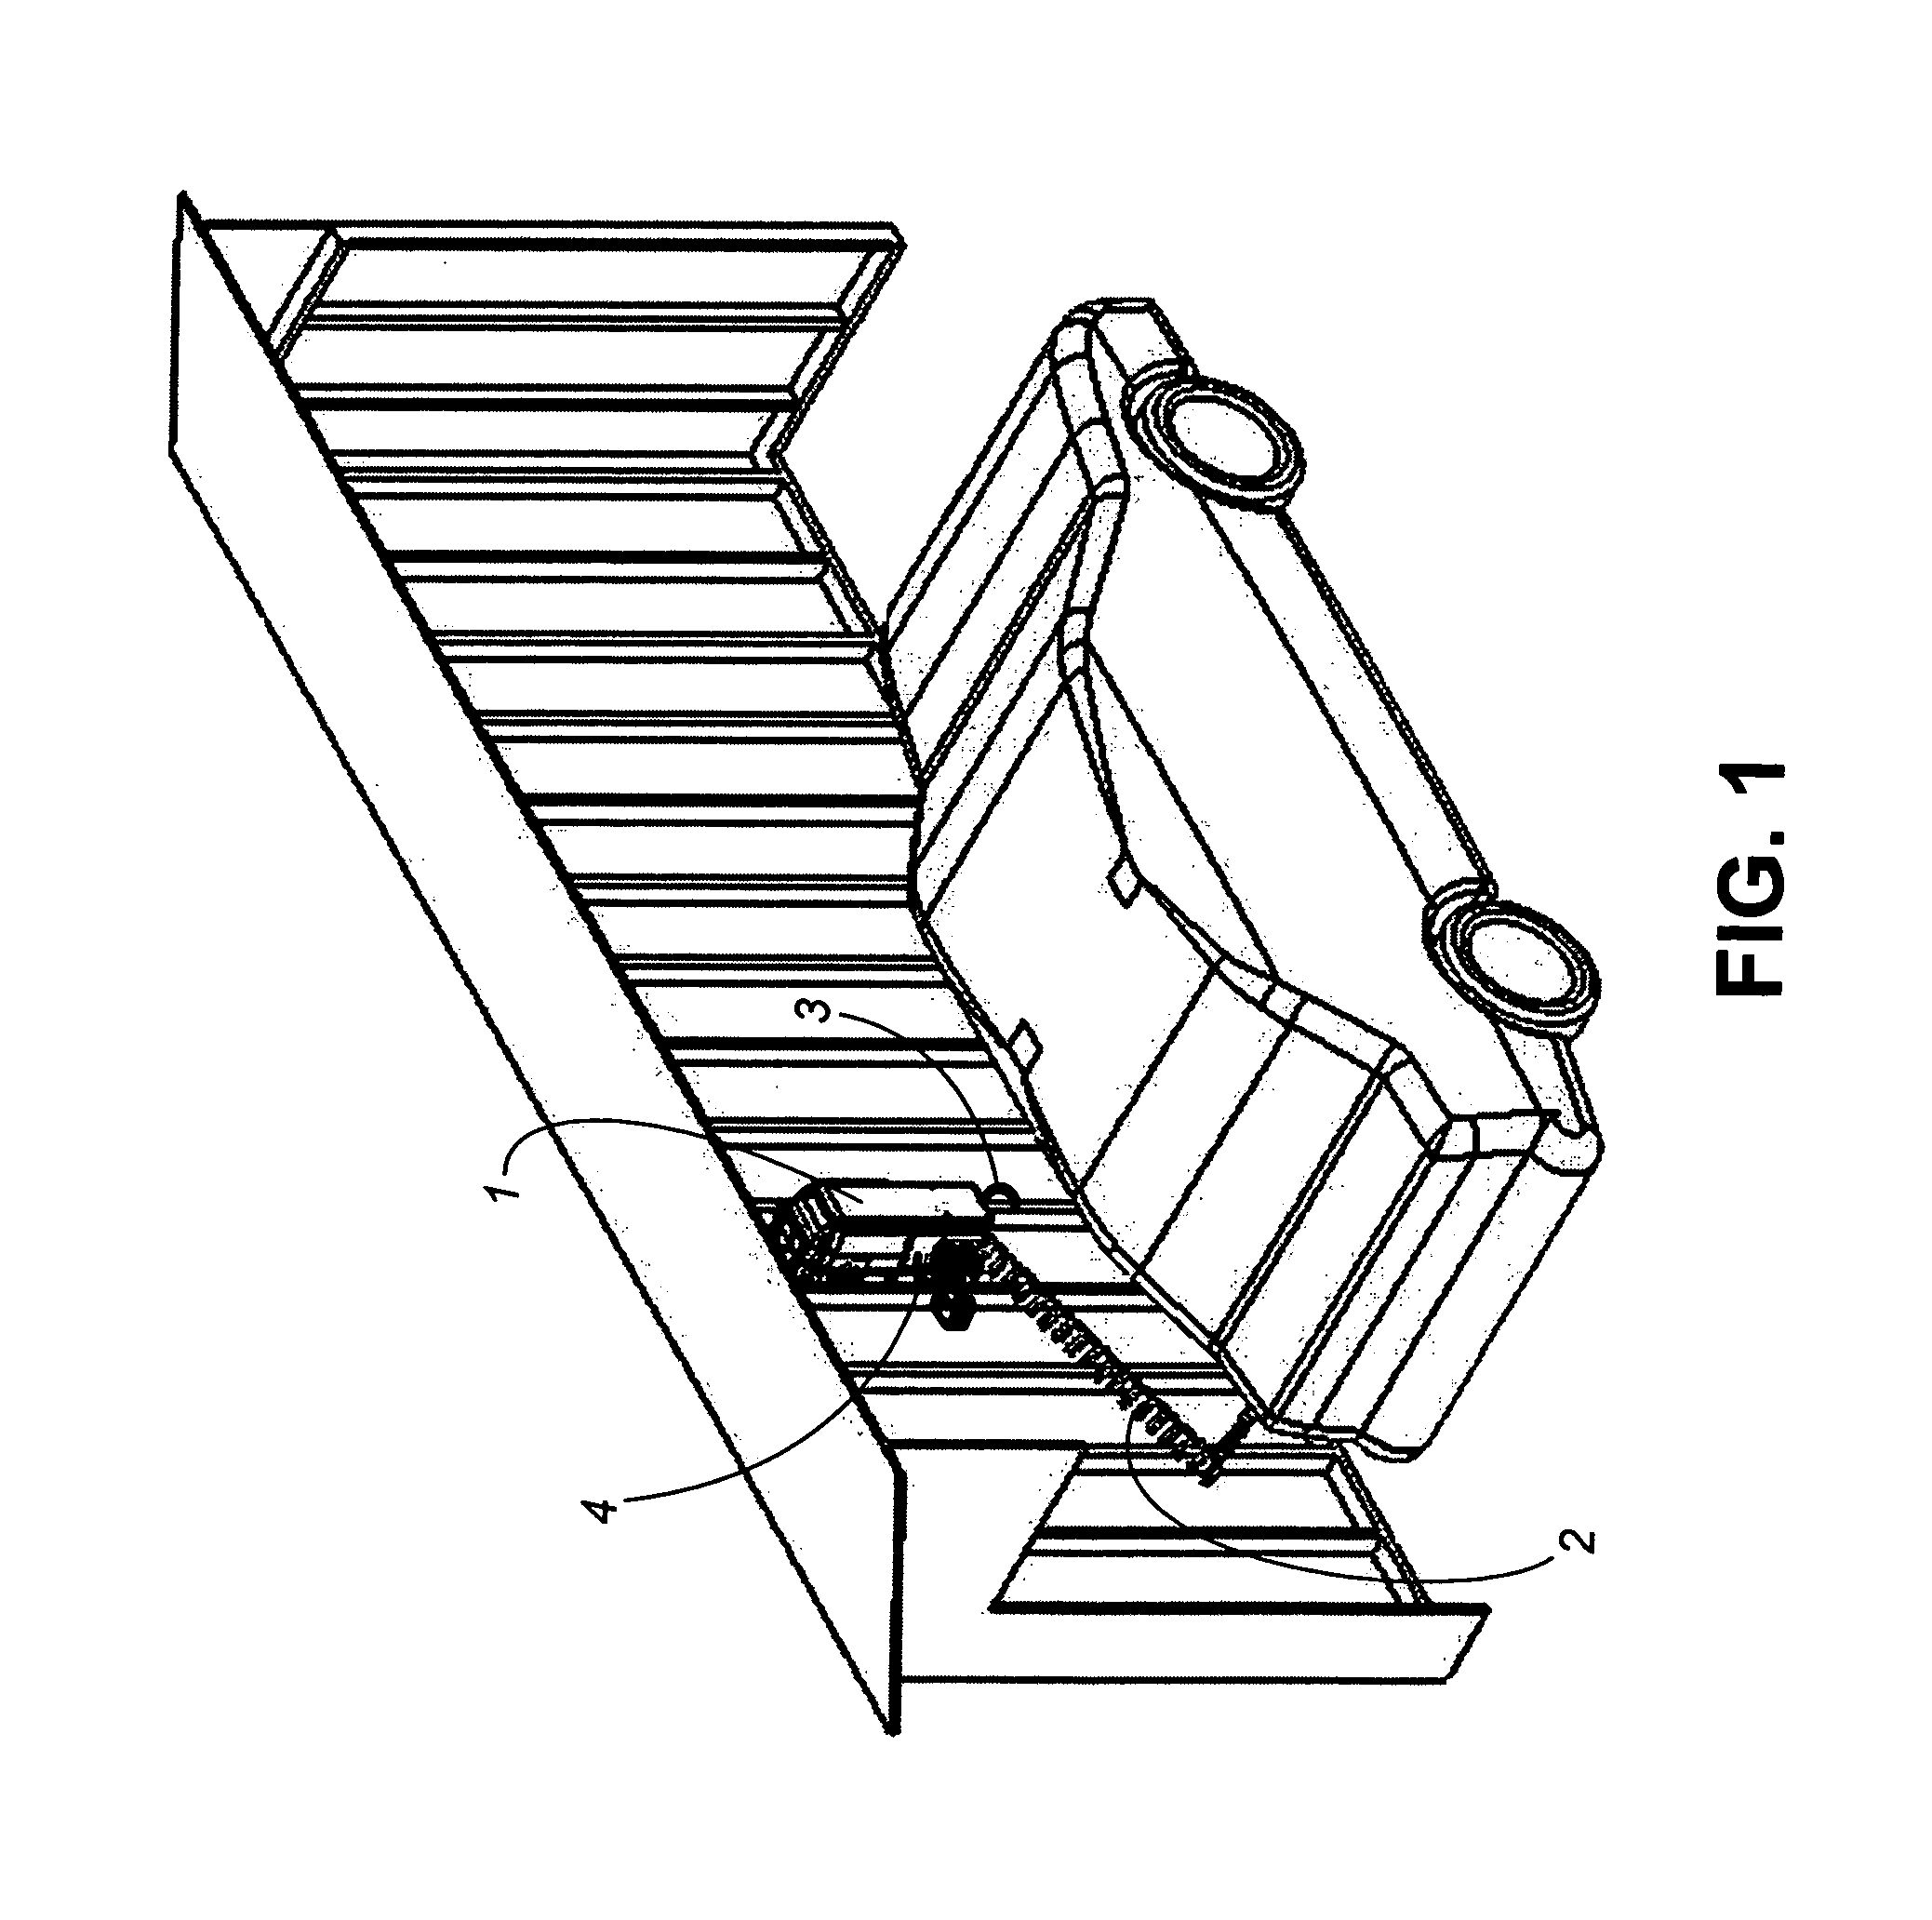 Residential compressor for refueling motor vehicles that operate on gaseous fuels